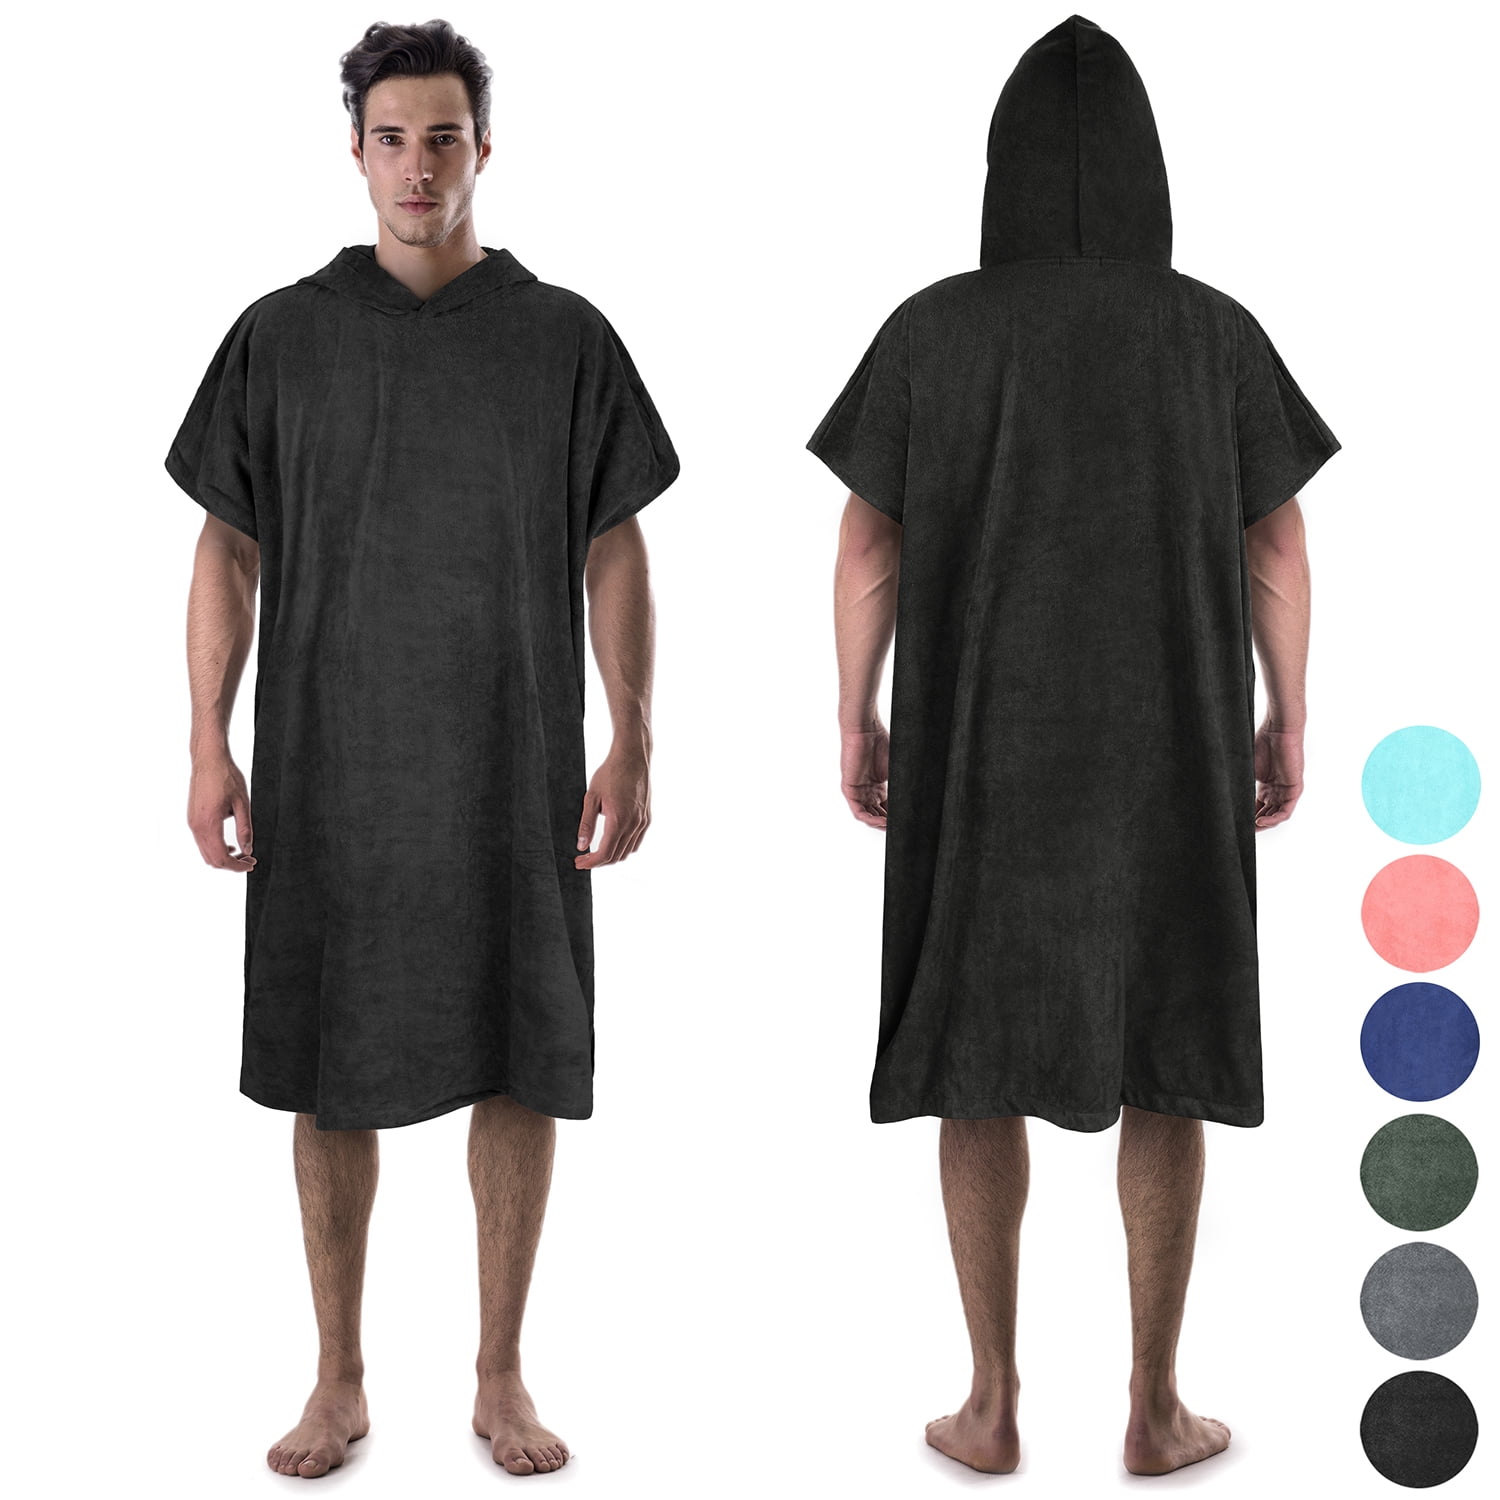 Hooded Bath Robe Towel Beach Surf Poncho with Absorbent Cotton for Swimming 